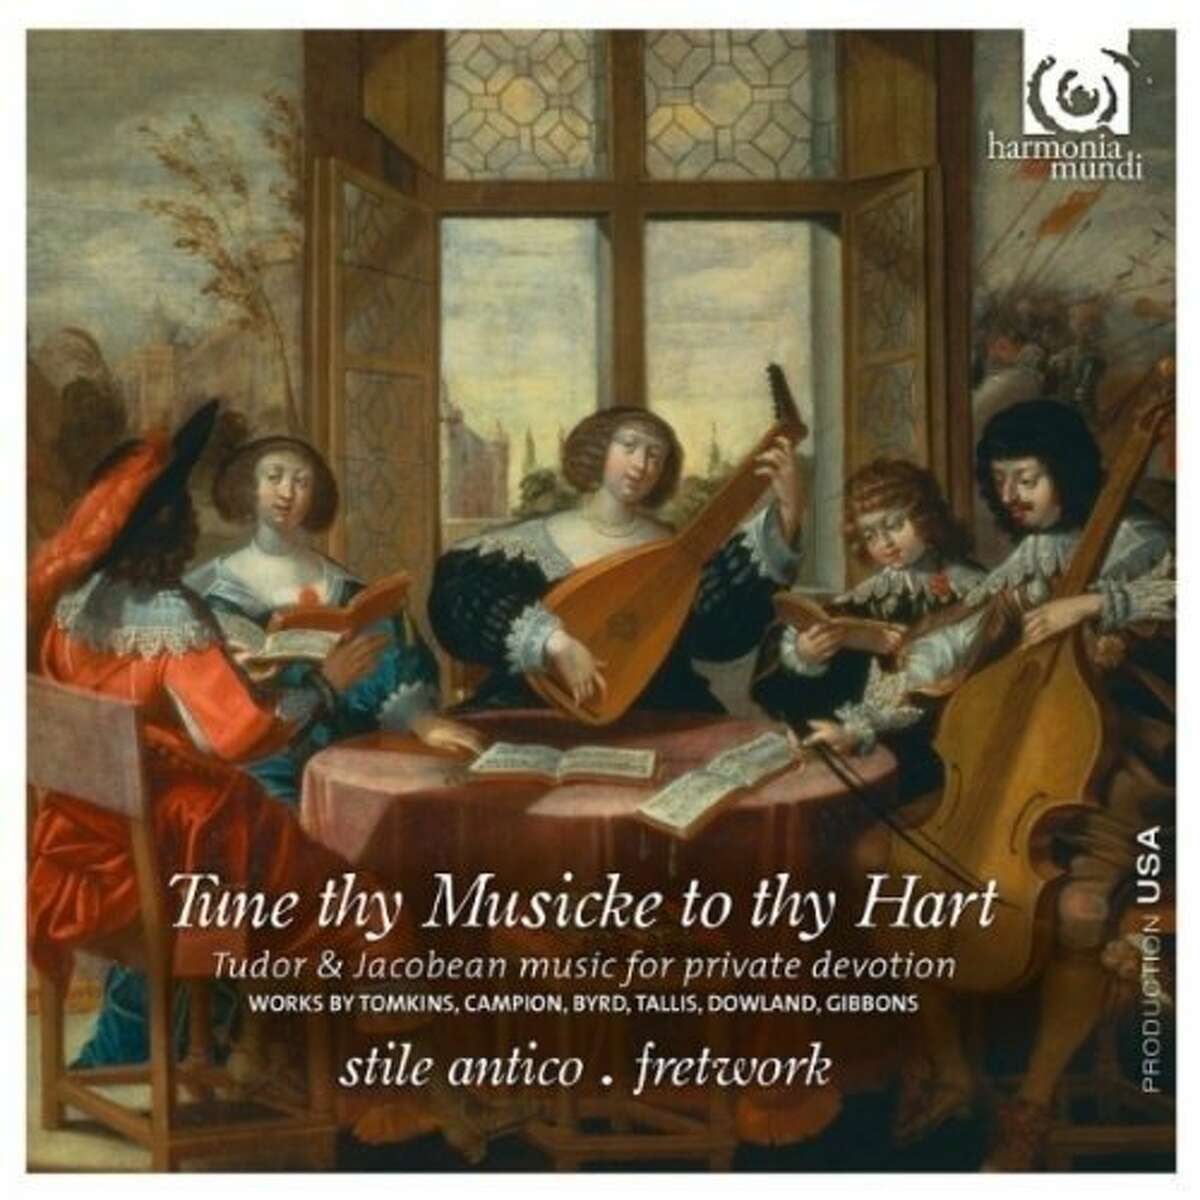 CD cover for "Tune thy Musicke to thy Hart," Stile Antico and Fretwork